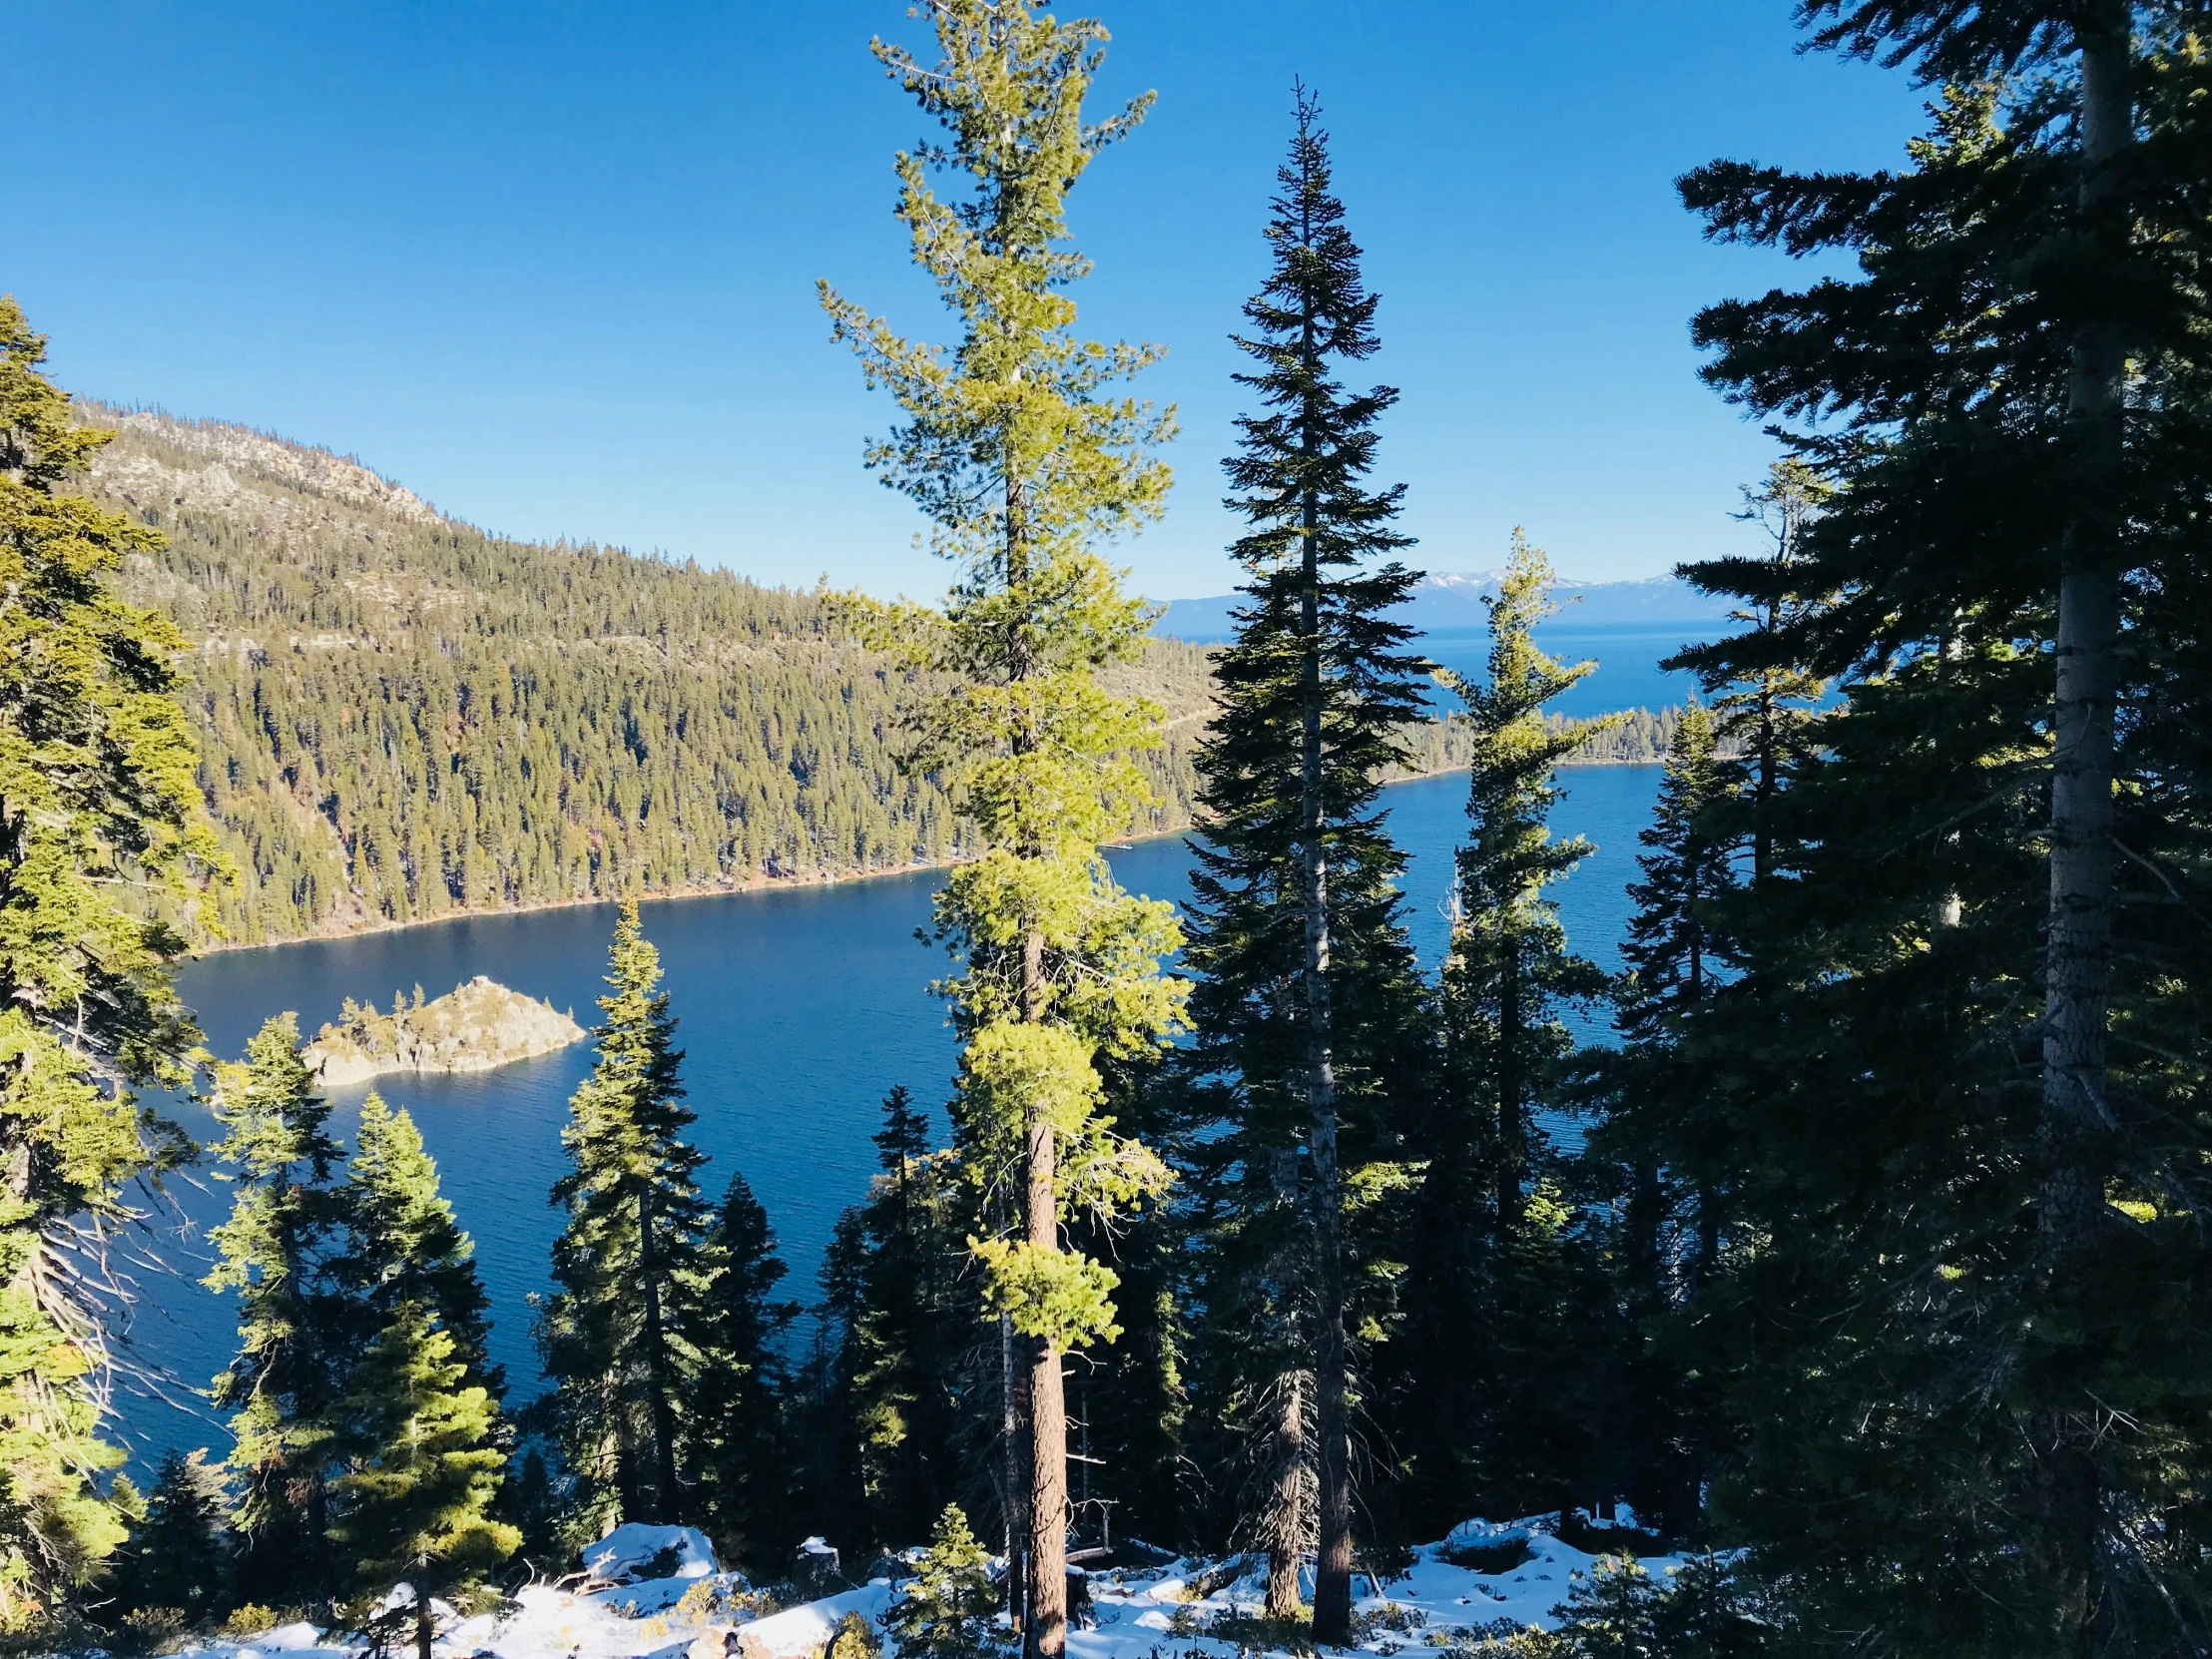 a large body of water surrounded by trees, by Whitney Sherman, unsplash, hurufiyya, obsidian towers in the distance, pine tree, 2000s photo, conde nast traveler photo